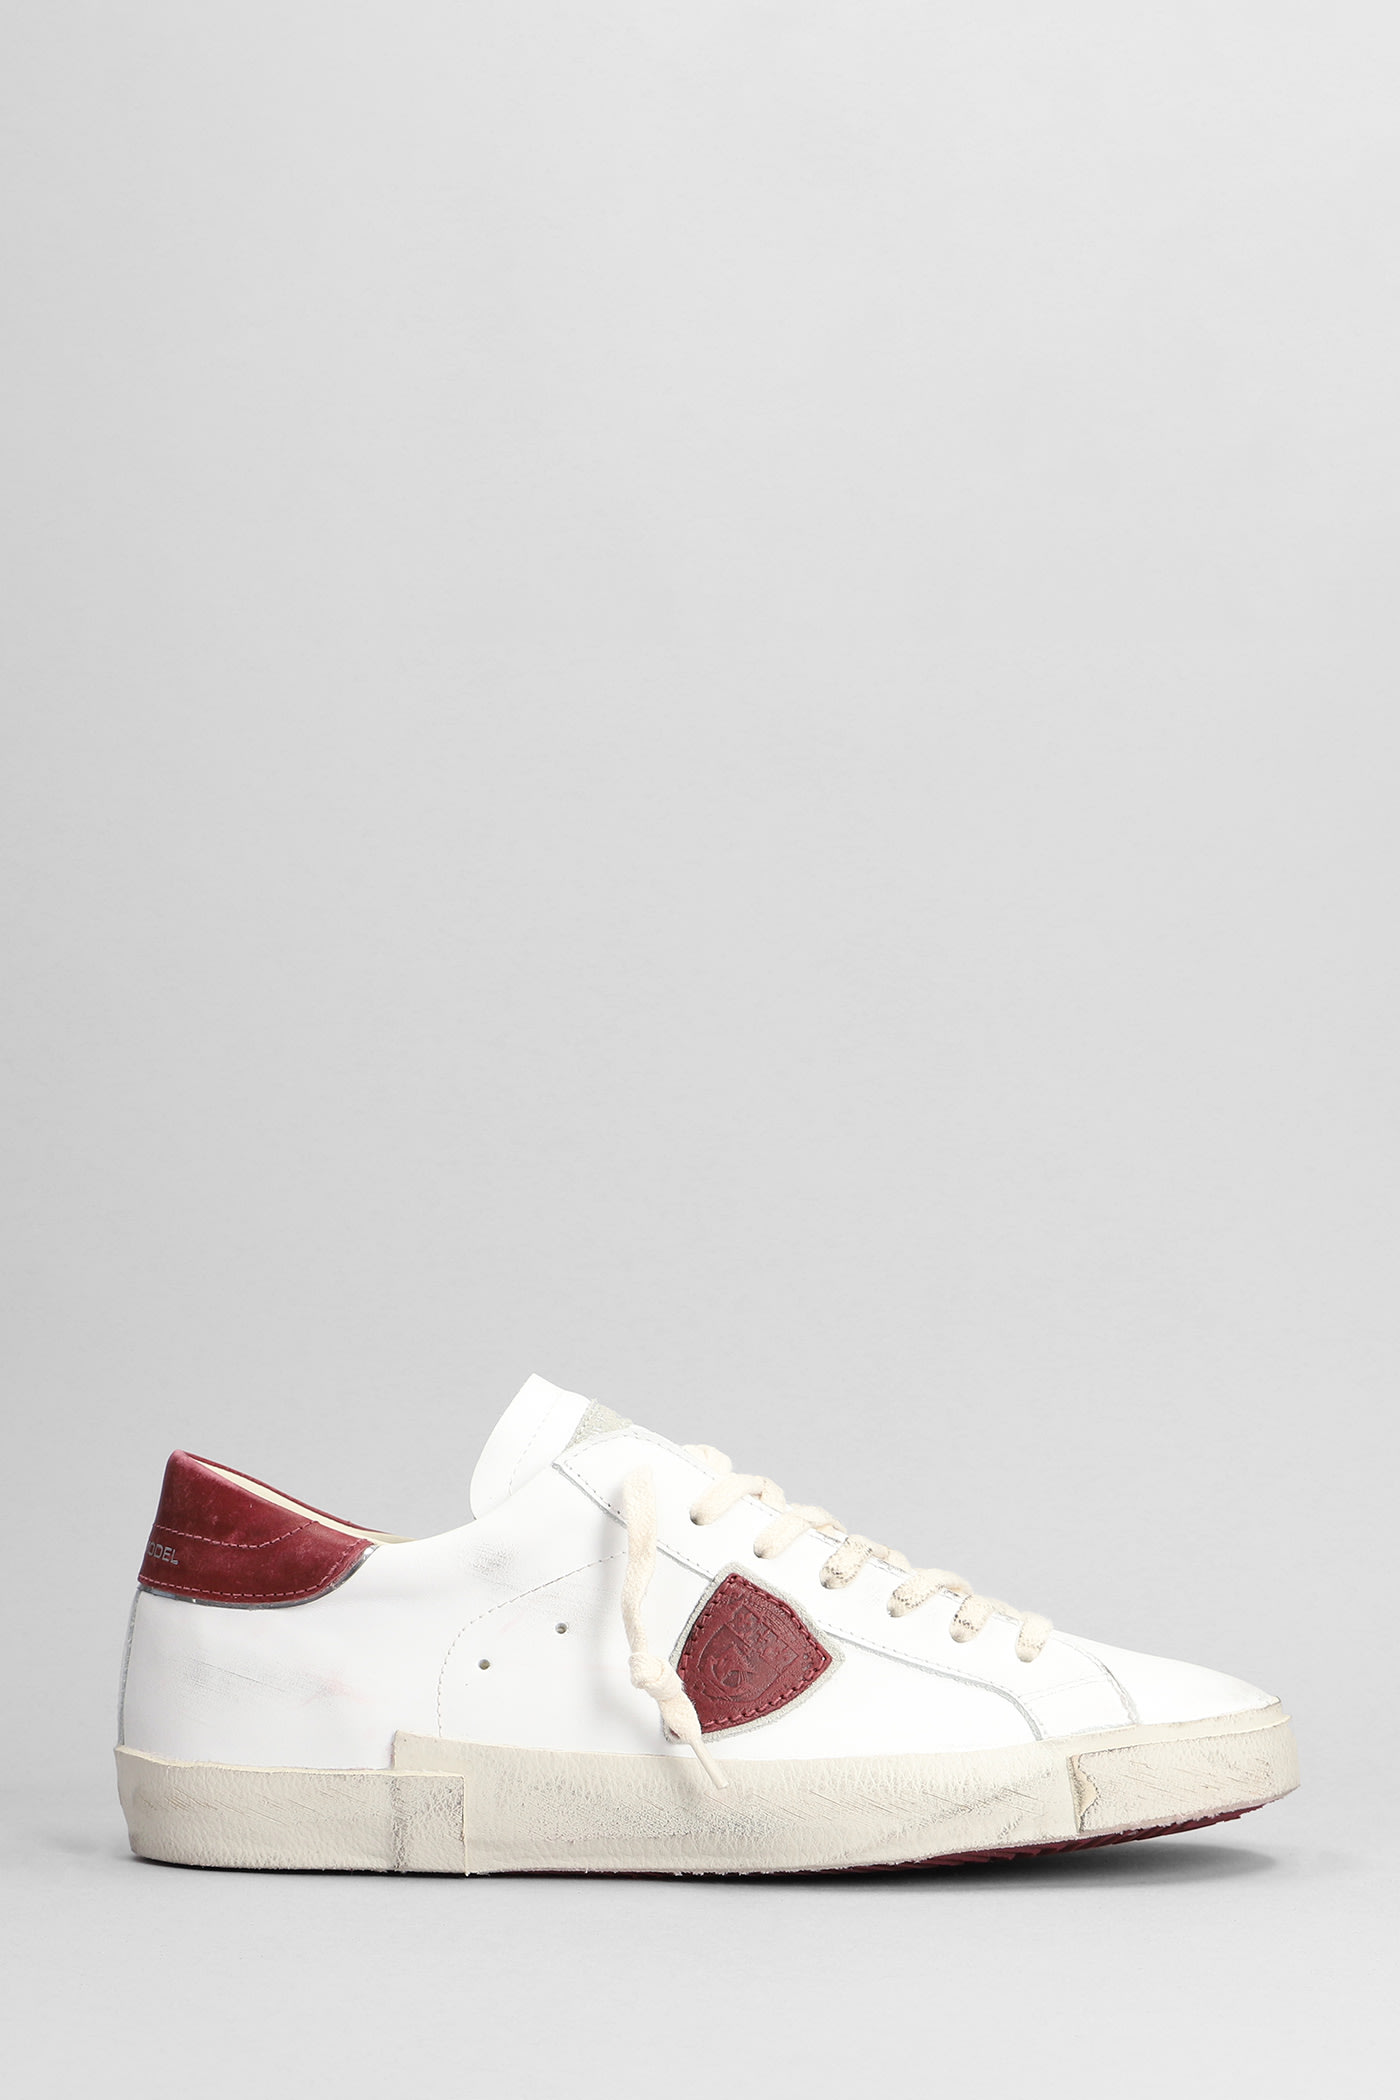 PHILIPPE MODEL PRSX SNEAKERS IN WHITE LEATHER